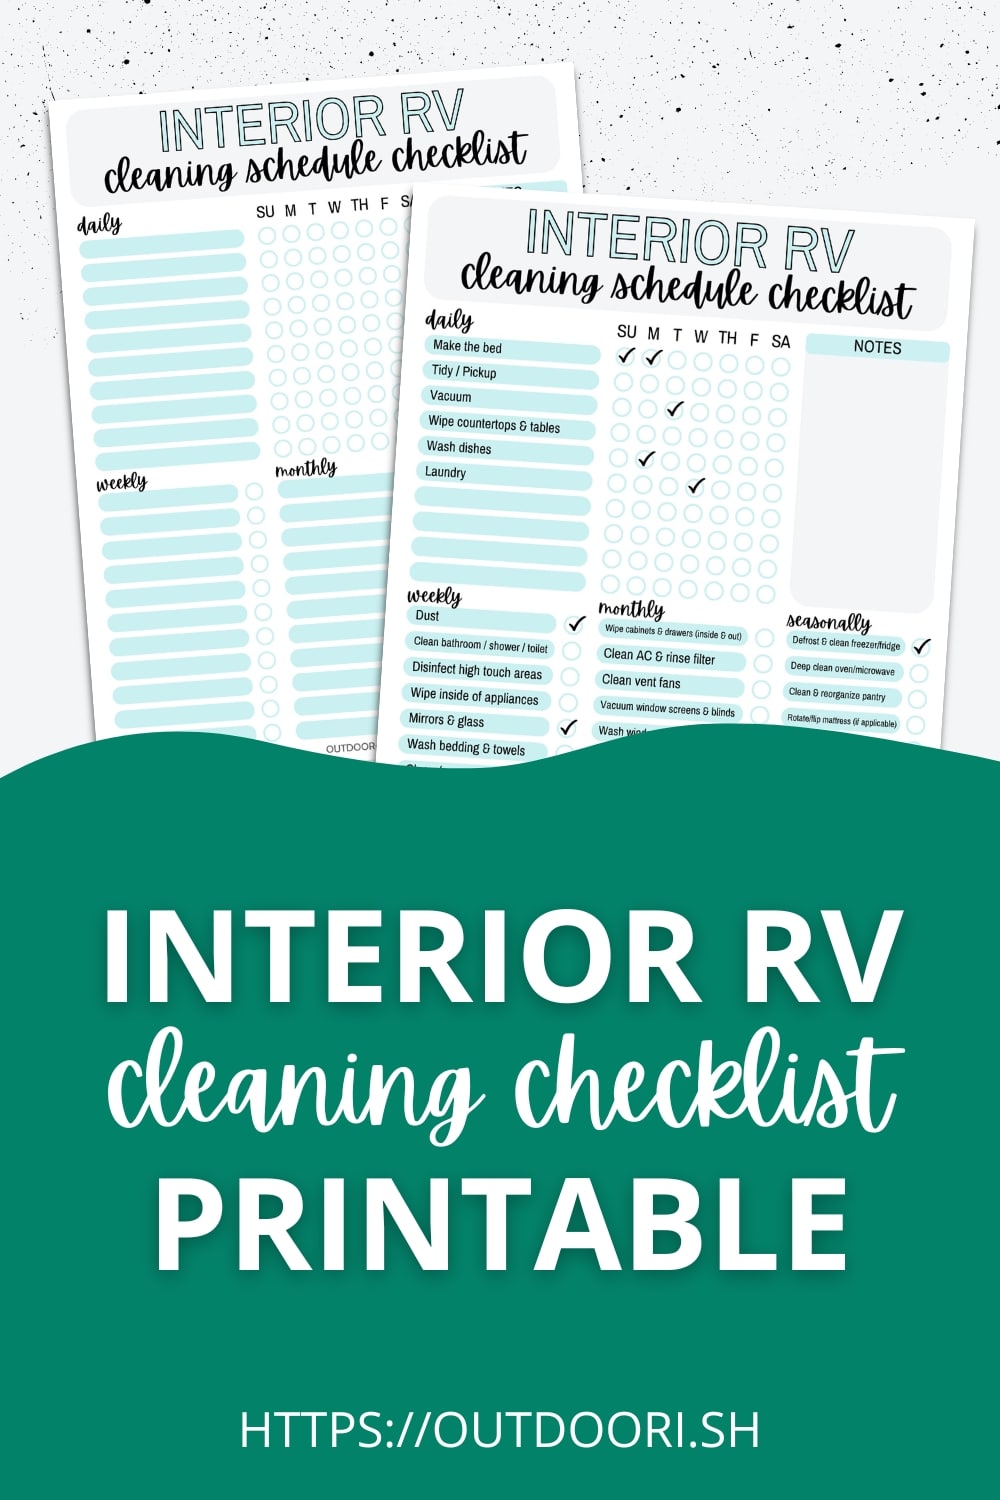 Mockup of the Interior RV cleaning checklist printable